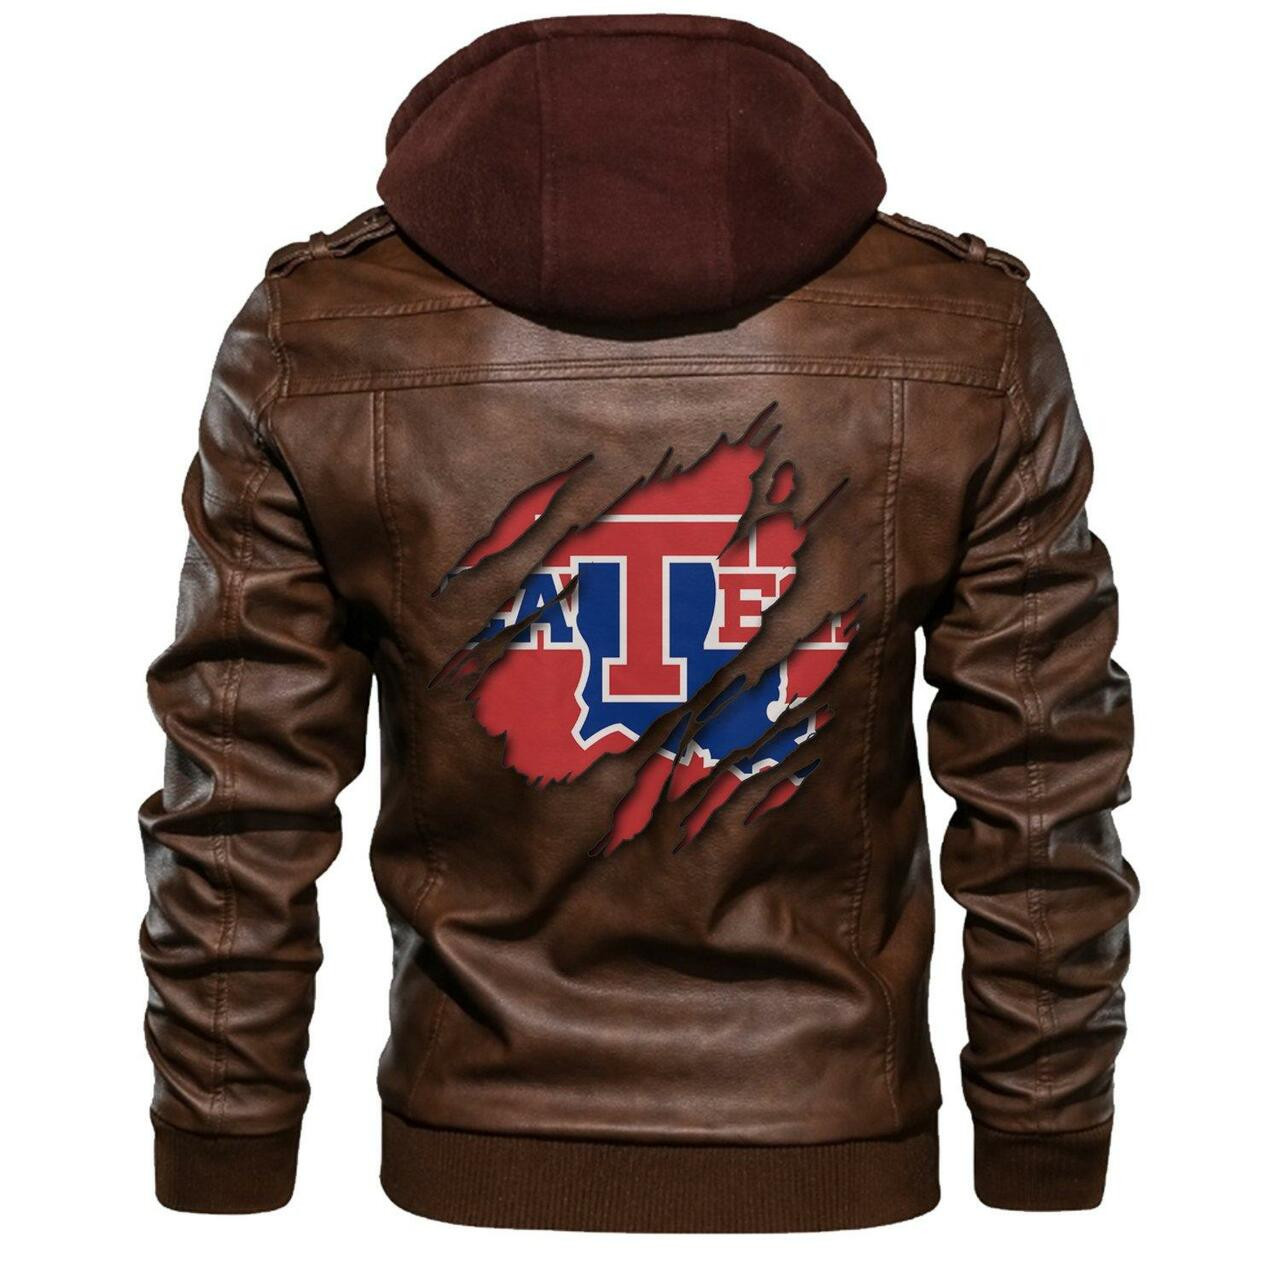 If you're looking for a new leather jacket this season - keep reading! 249